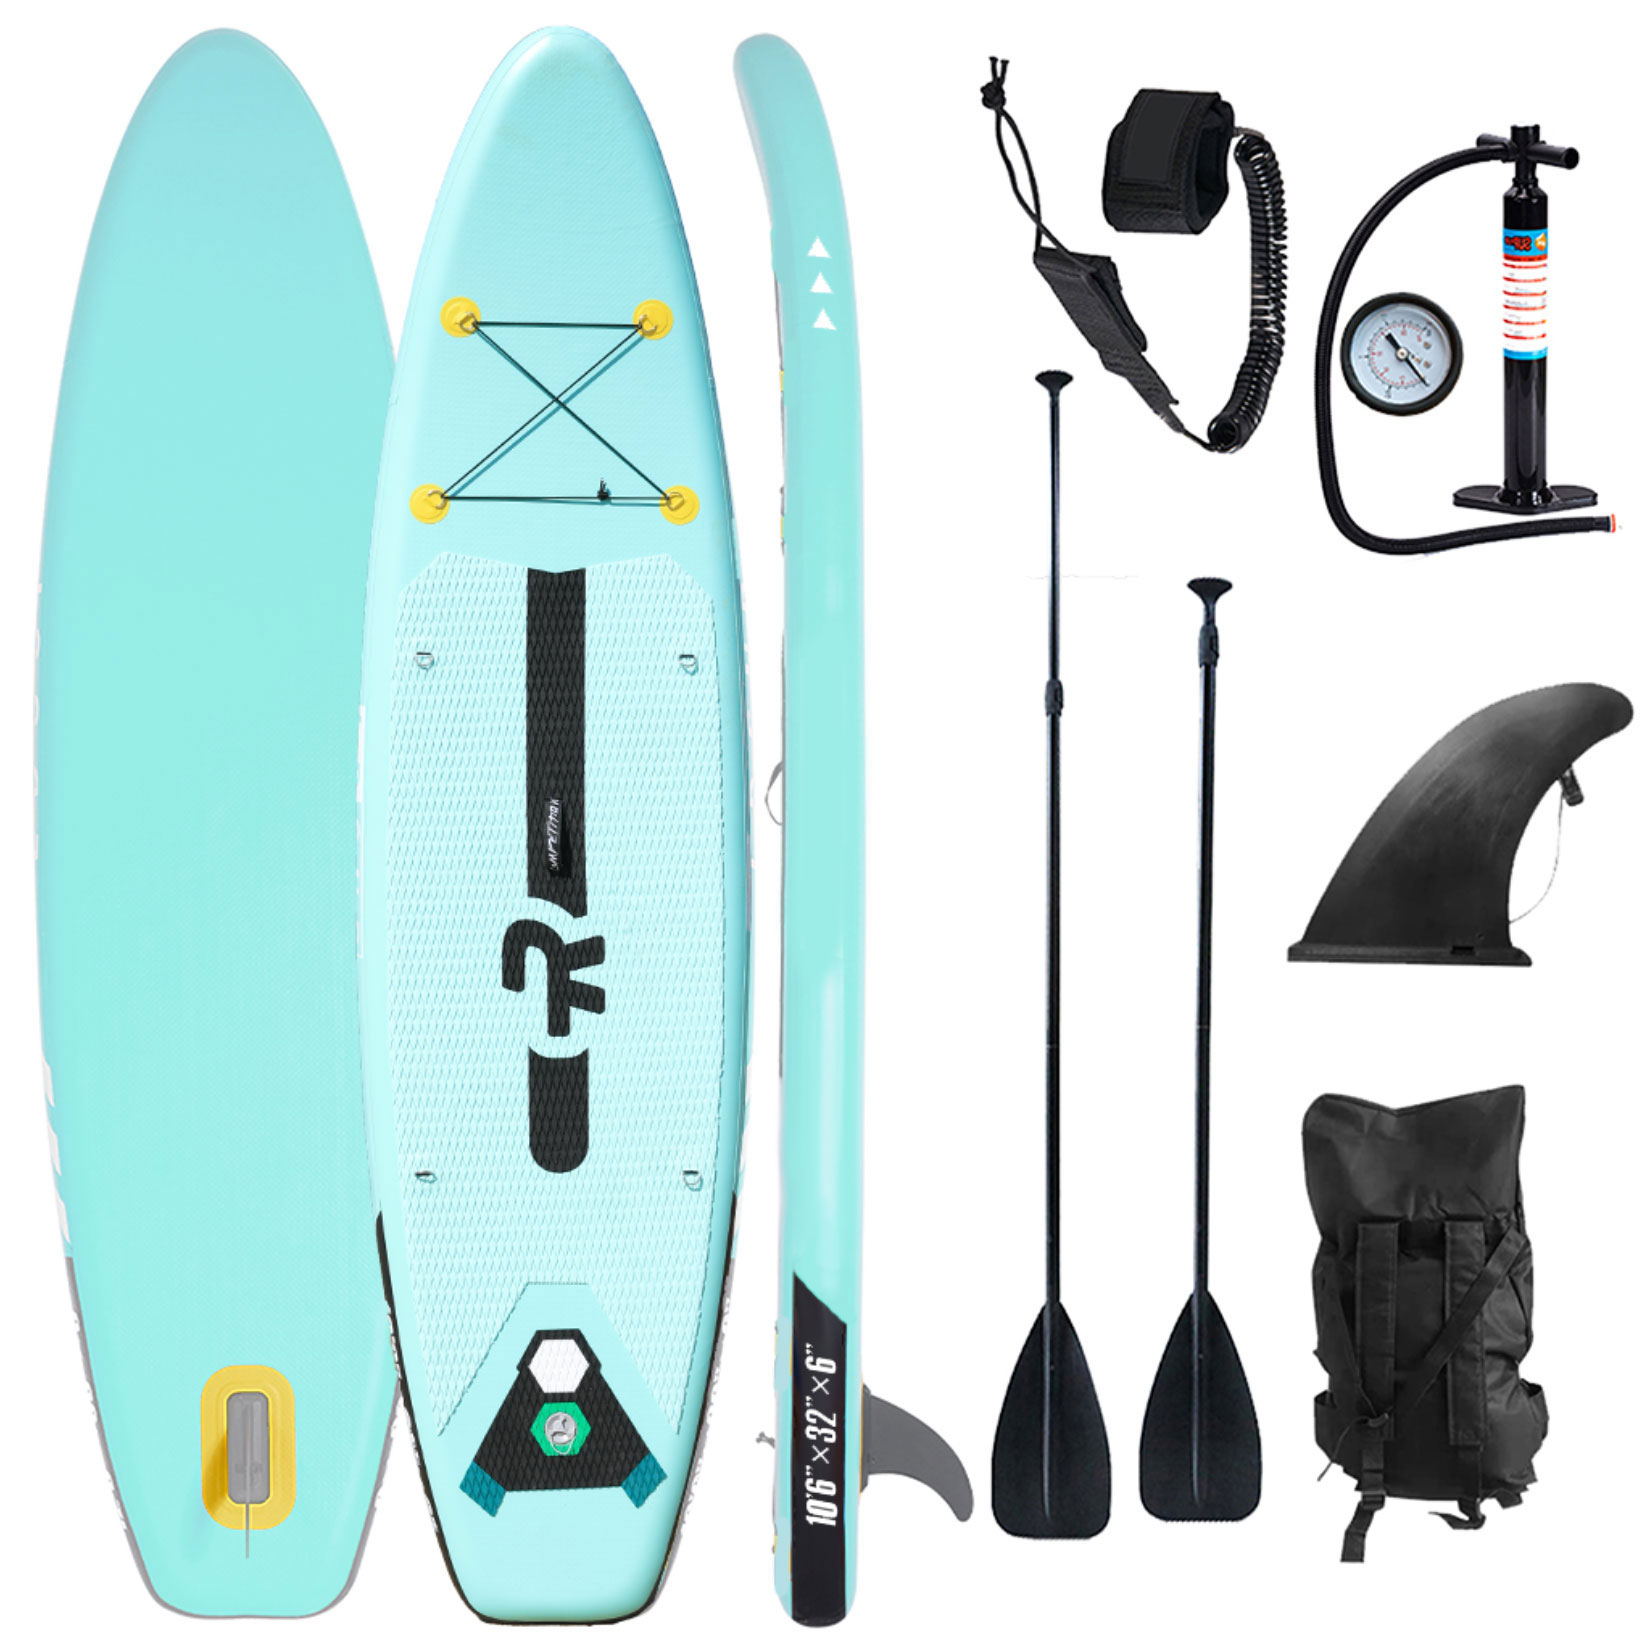 Paddle Boards Inflatable Stand Up Paddle Board with Durable SUP Accessories & Carry Bag Surf Control, Non-Slip Deck, Leash, Paddle and Pump for Youth & Adult 10'6×32"×6"